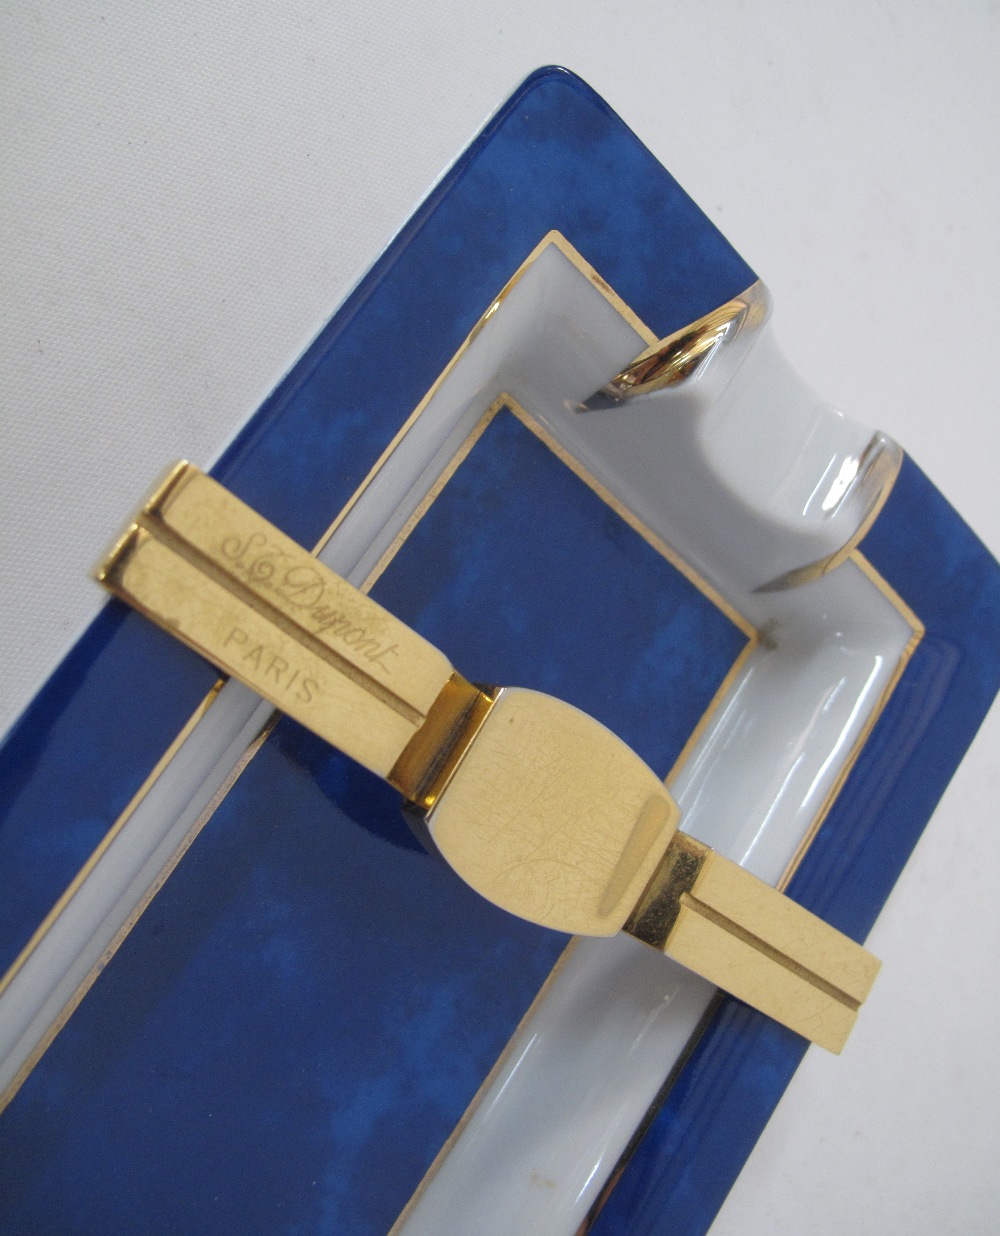 A Dupont limited edition blue, white and gold porcelain cigar ashtray by Limoges - Image 3 of 7